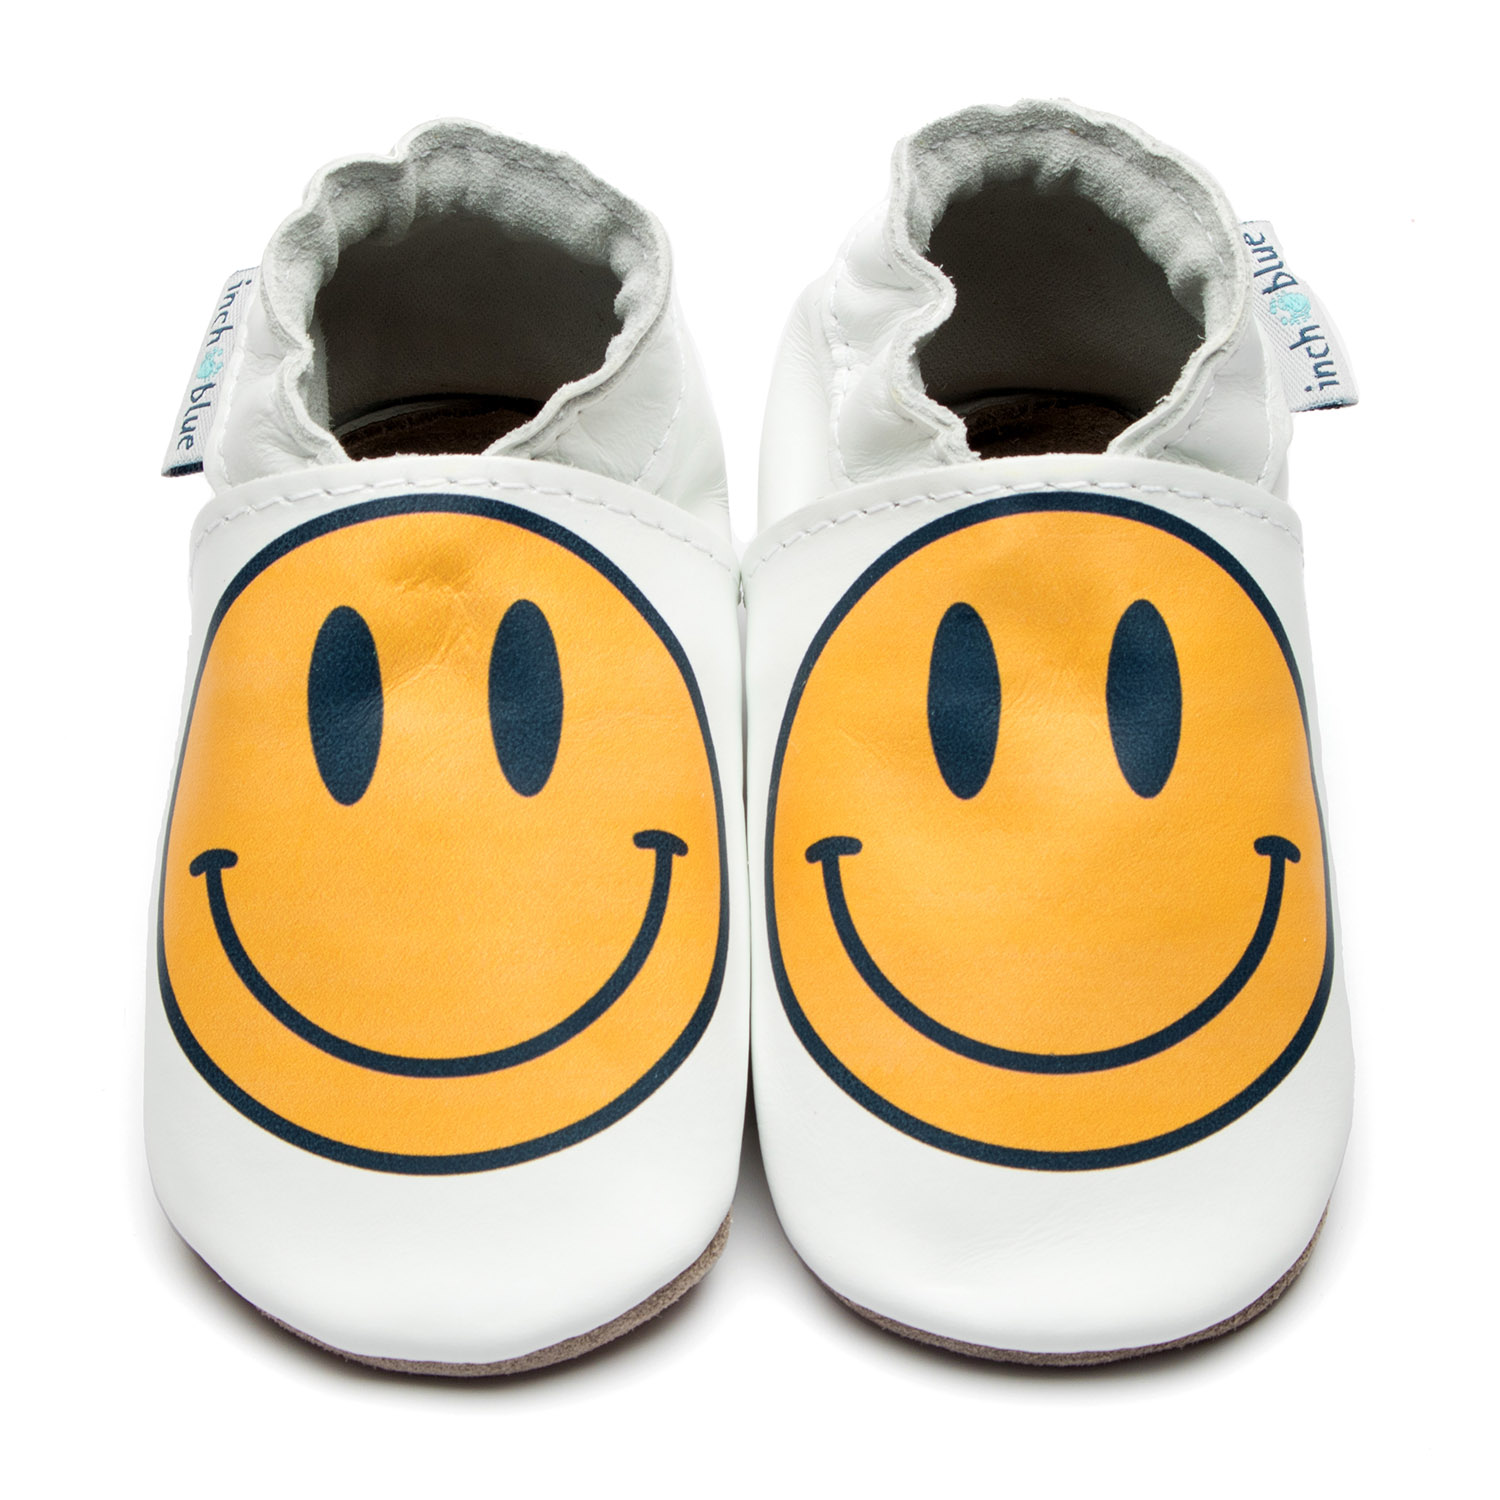 Baby & Toddler shoes | Smiley | Fun | Podiatrist approved | Barefoot ...